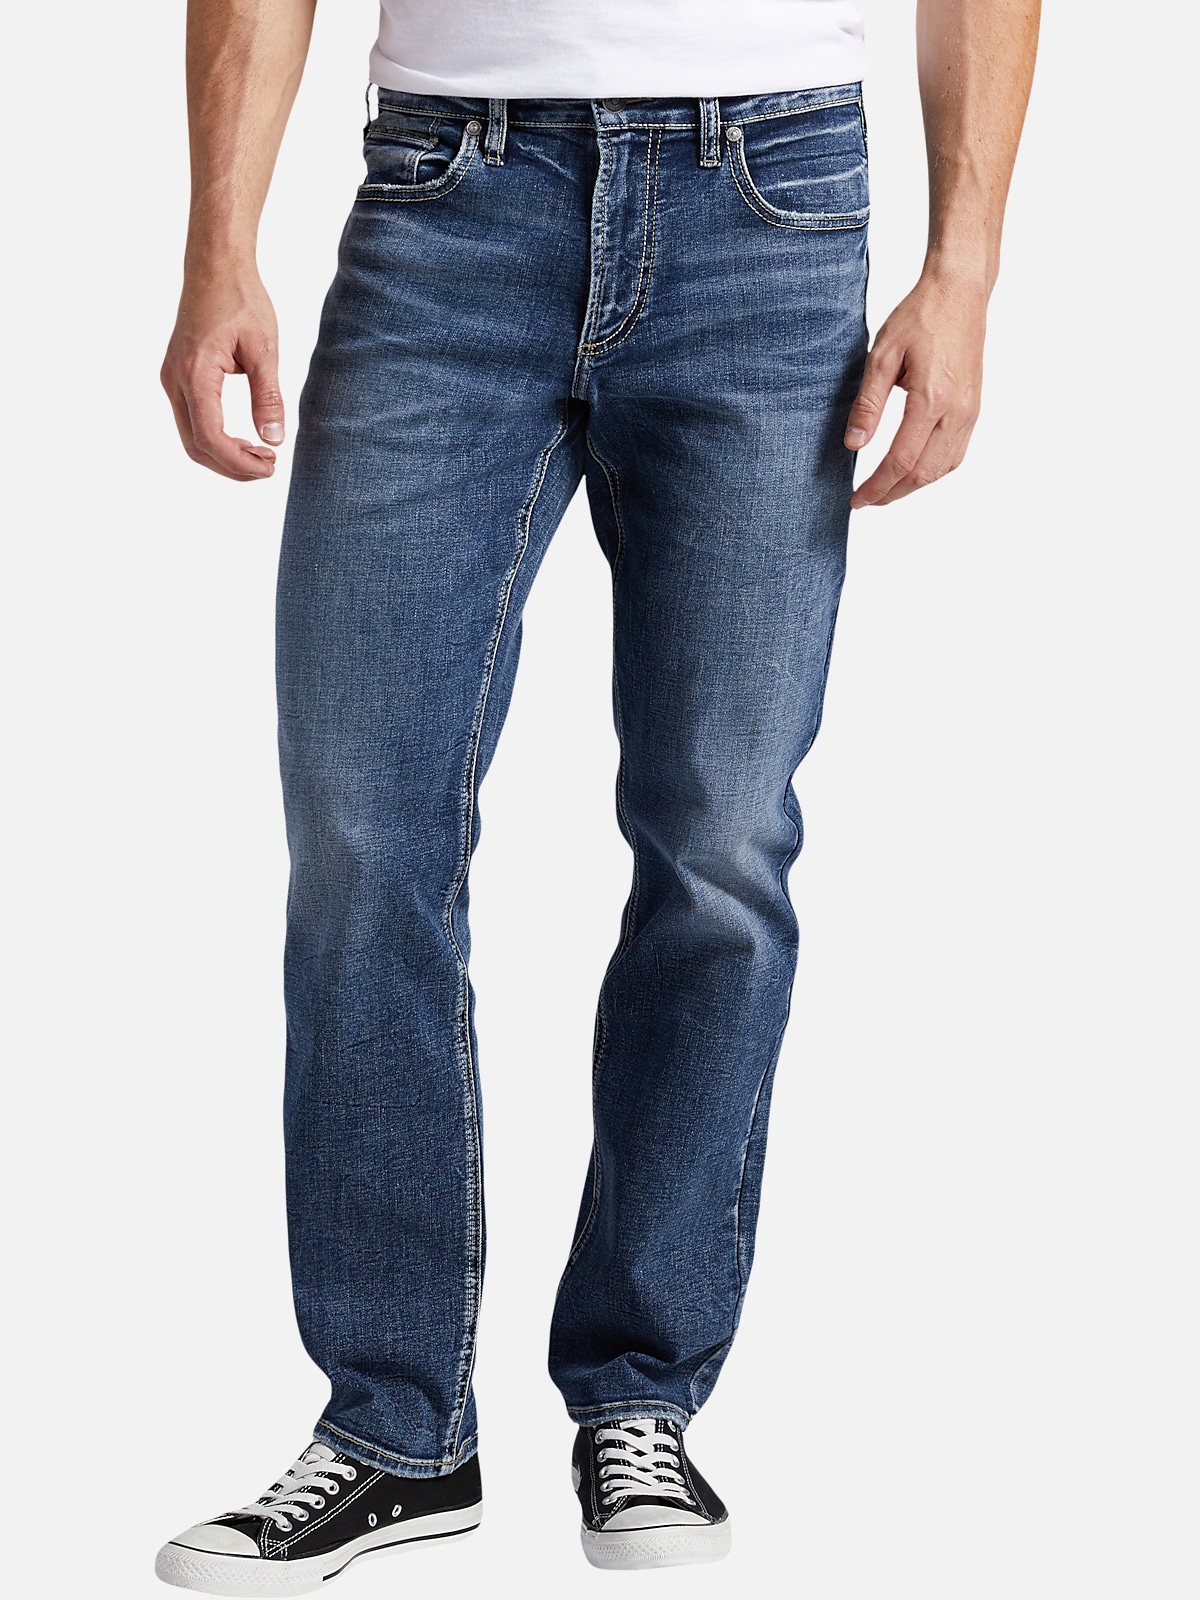 Silver Jeans Eddie Athletic Fit Tapered Jeans | All Clearance $39.99 ...